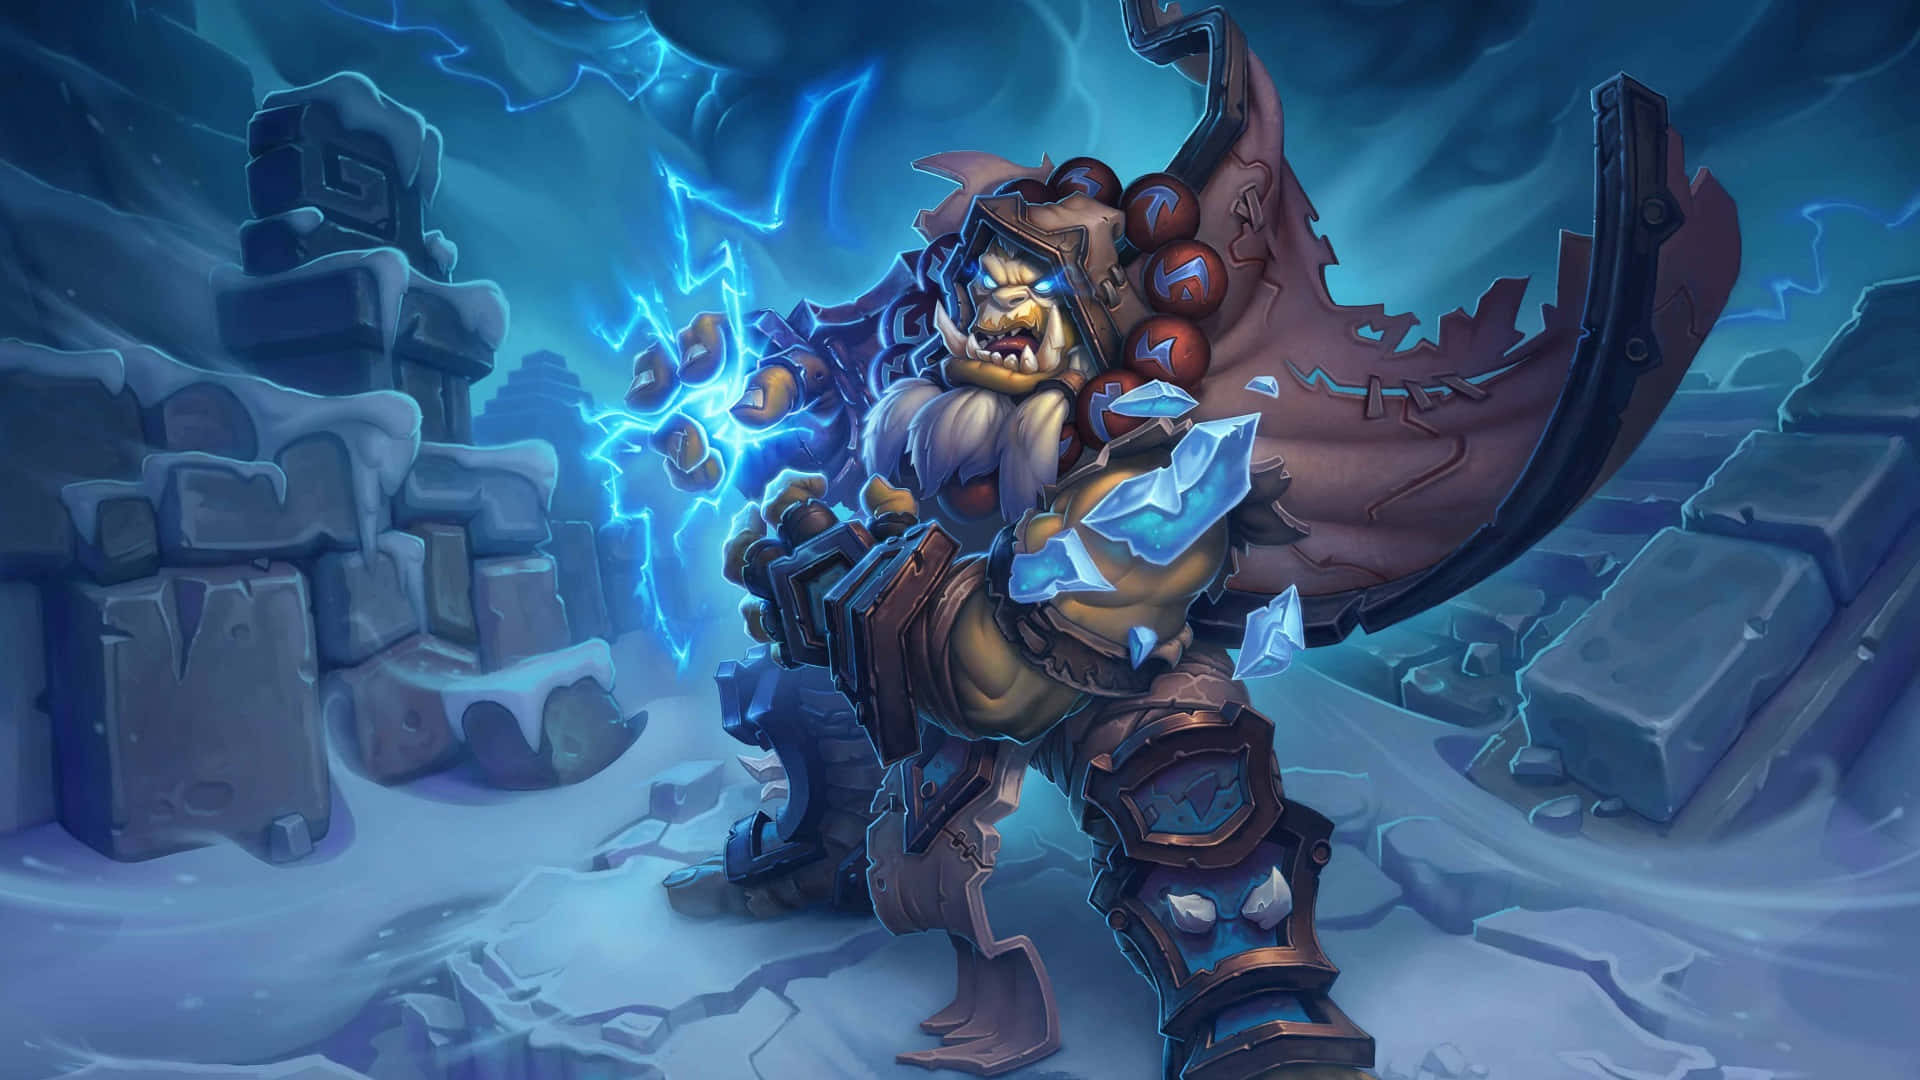 "Be Ready for an Epic Adventure in Hearthstone"